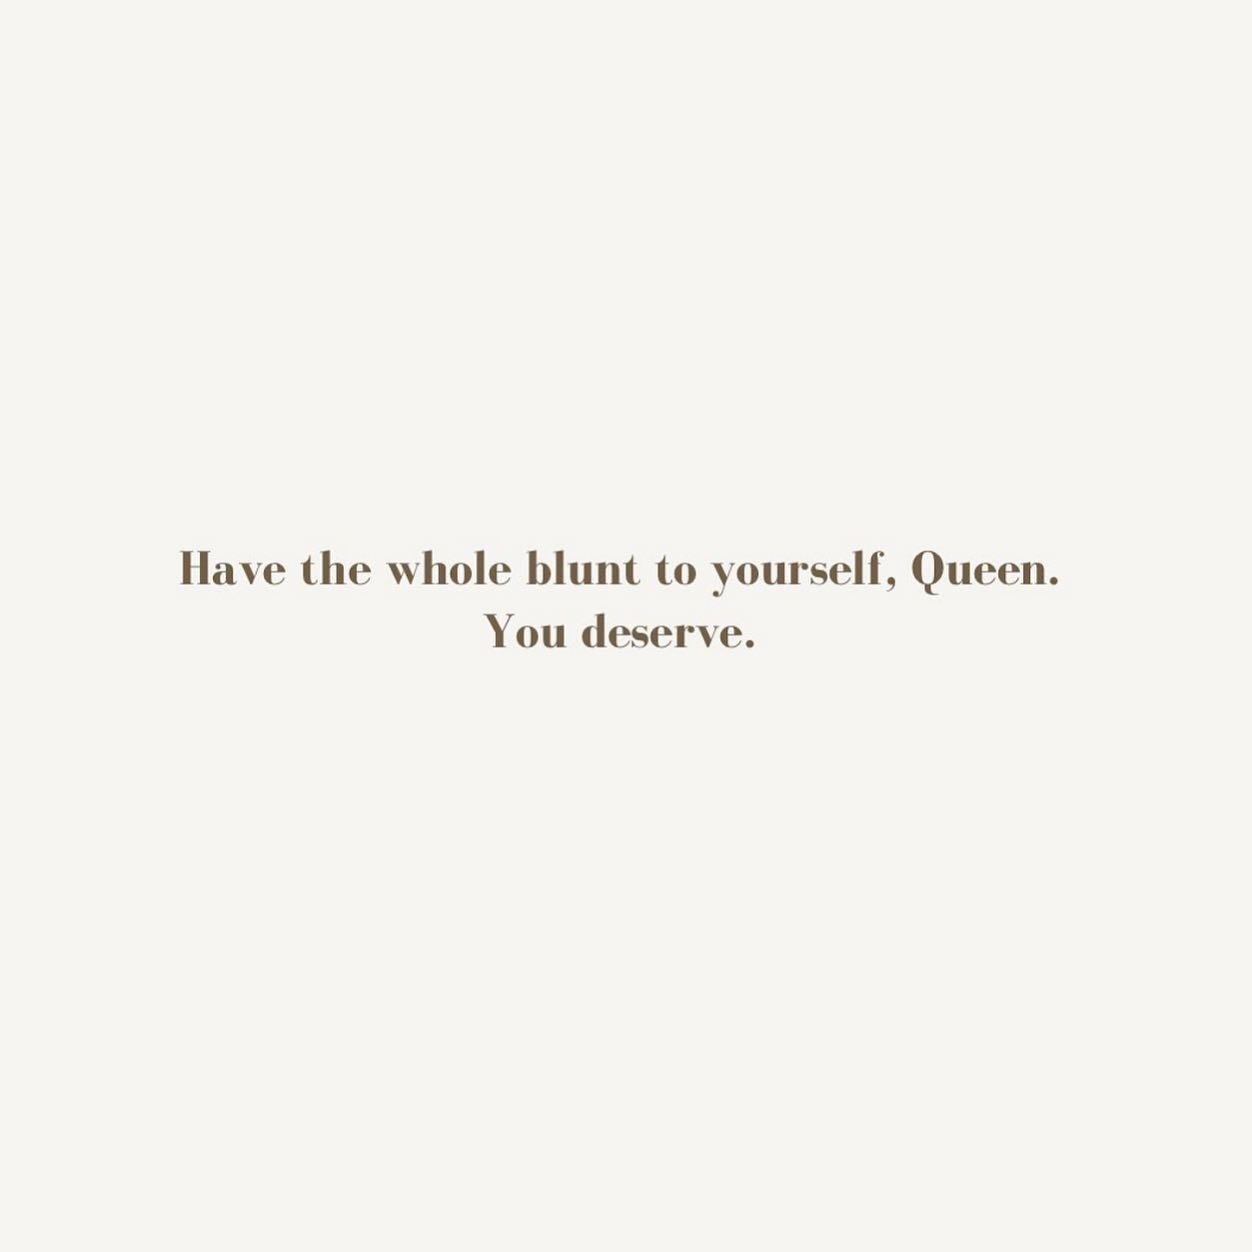 Daily Reminder. Self care. 🤍

#women #weed #cannabis #weedinstargram #hightimes #lifestyle #streetlawyerservices #womenandweed #stoner #cannabisculture #highlife #highsociety #indica #sativa #selfcare #dailyreminder #selflove #queen